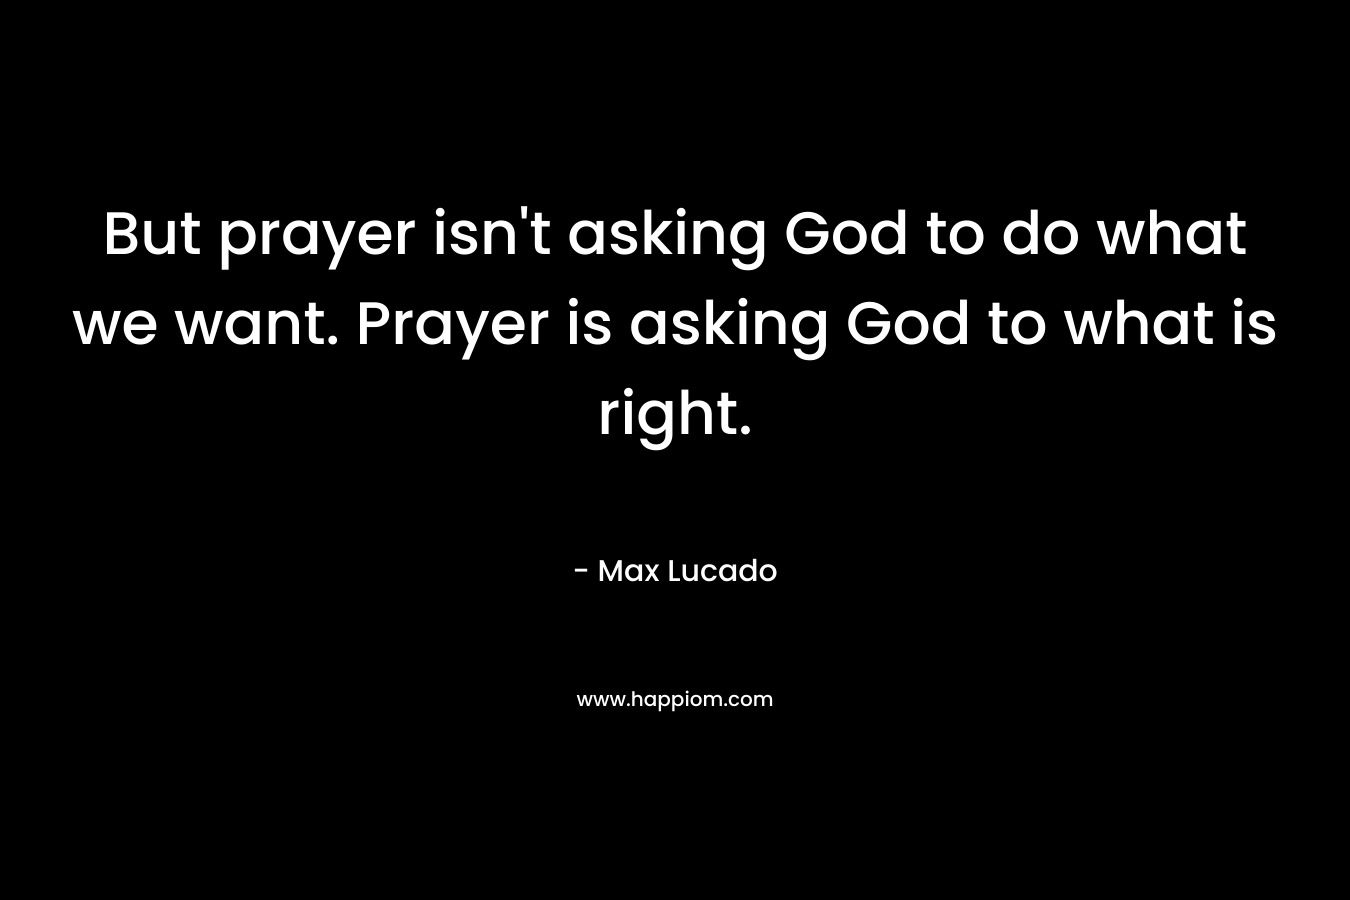 But prayer isn't asking God to do what we want. Prayer is asking God to what is right.